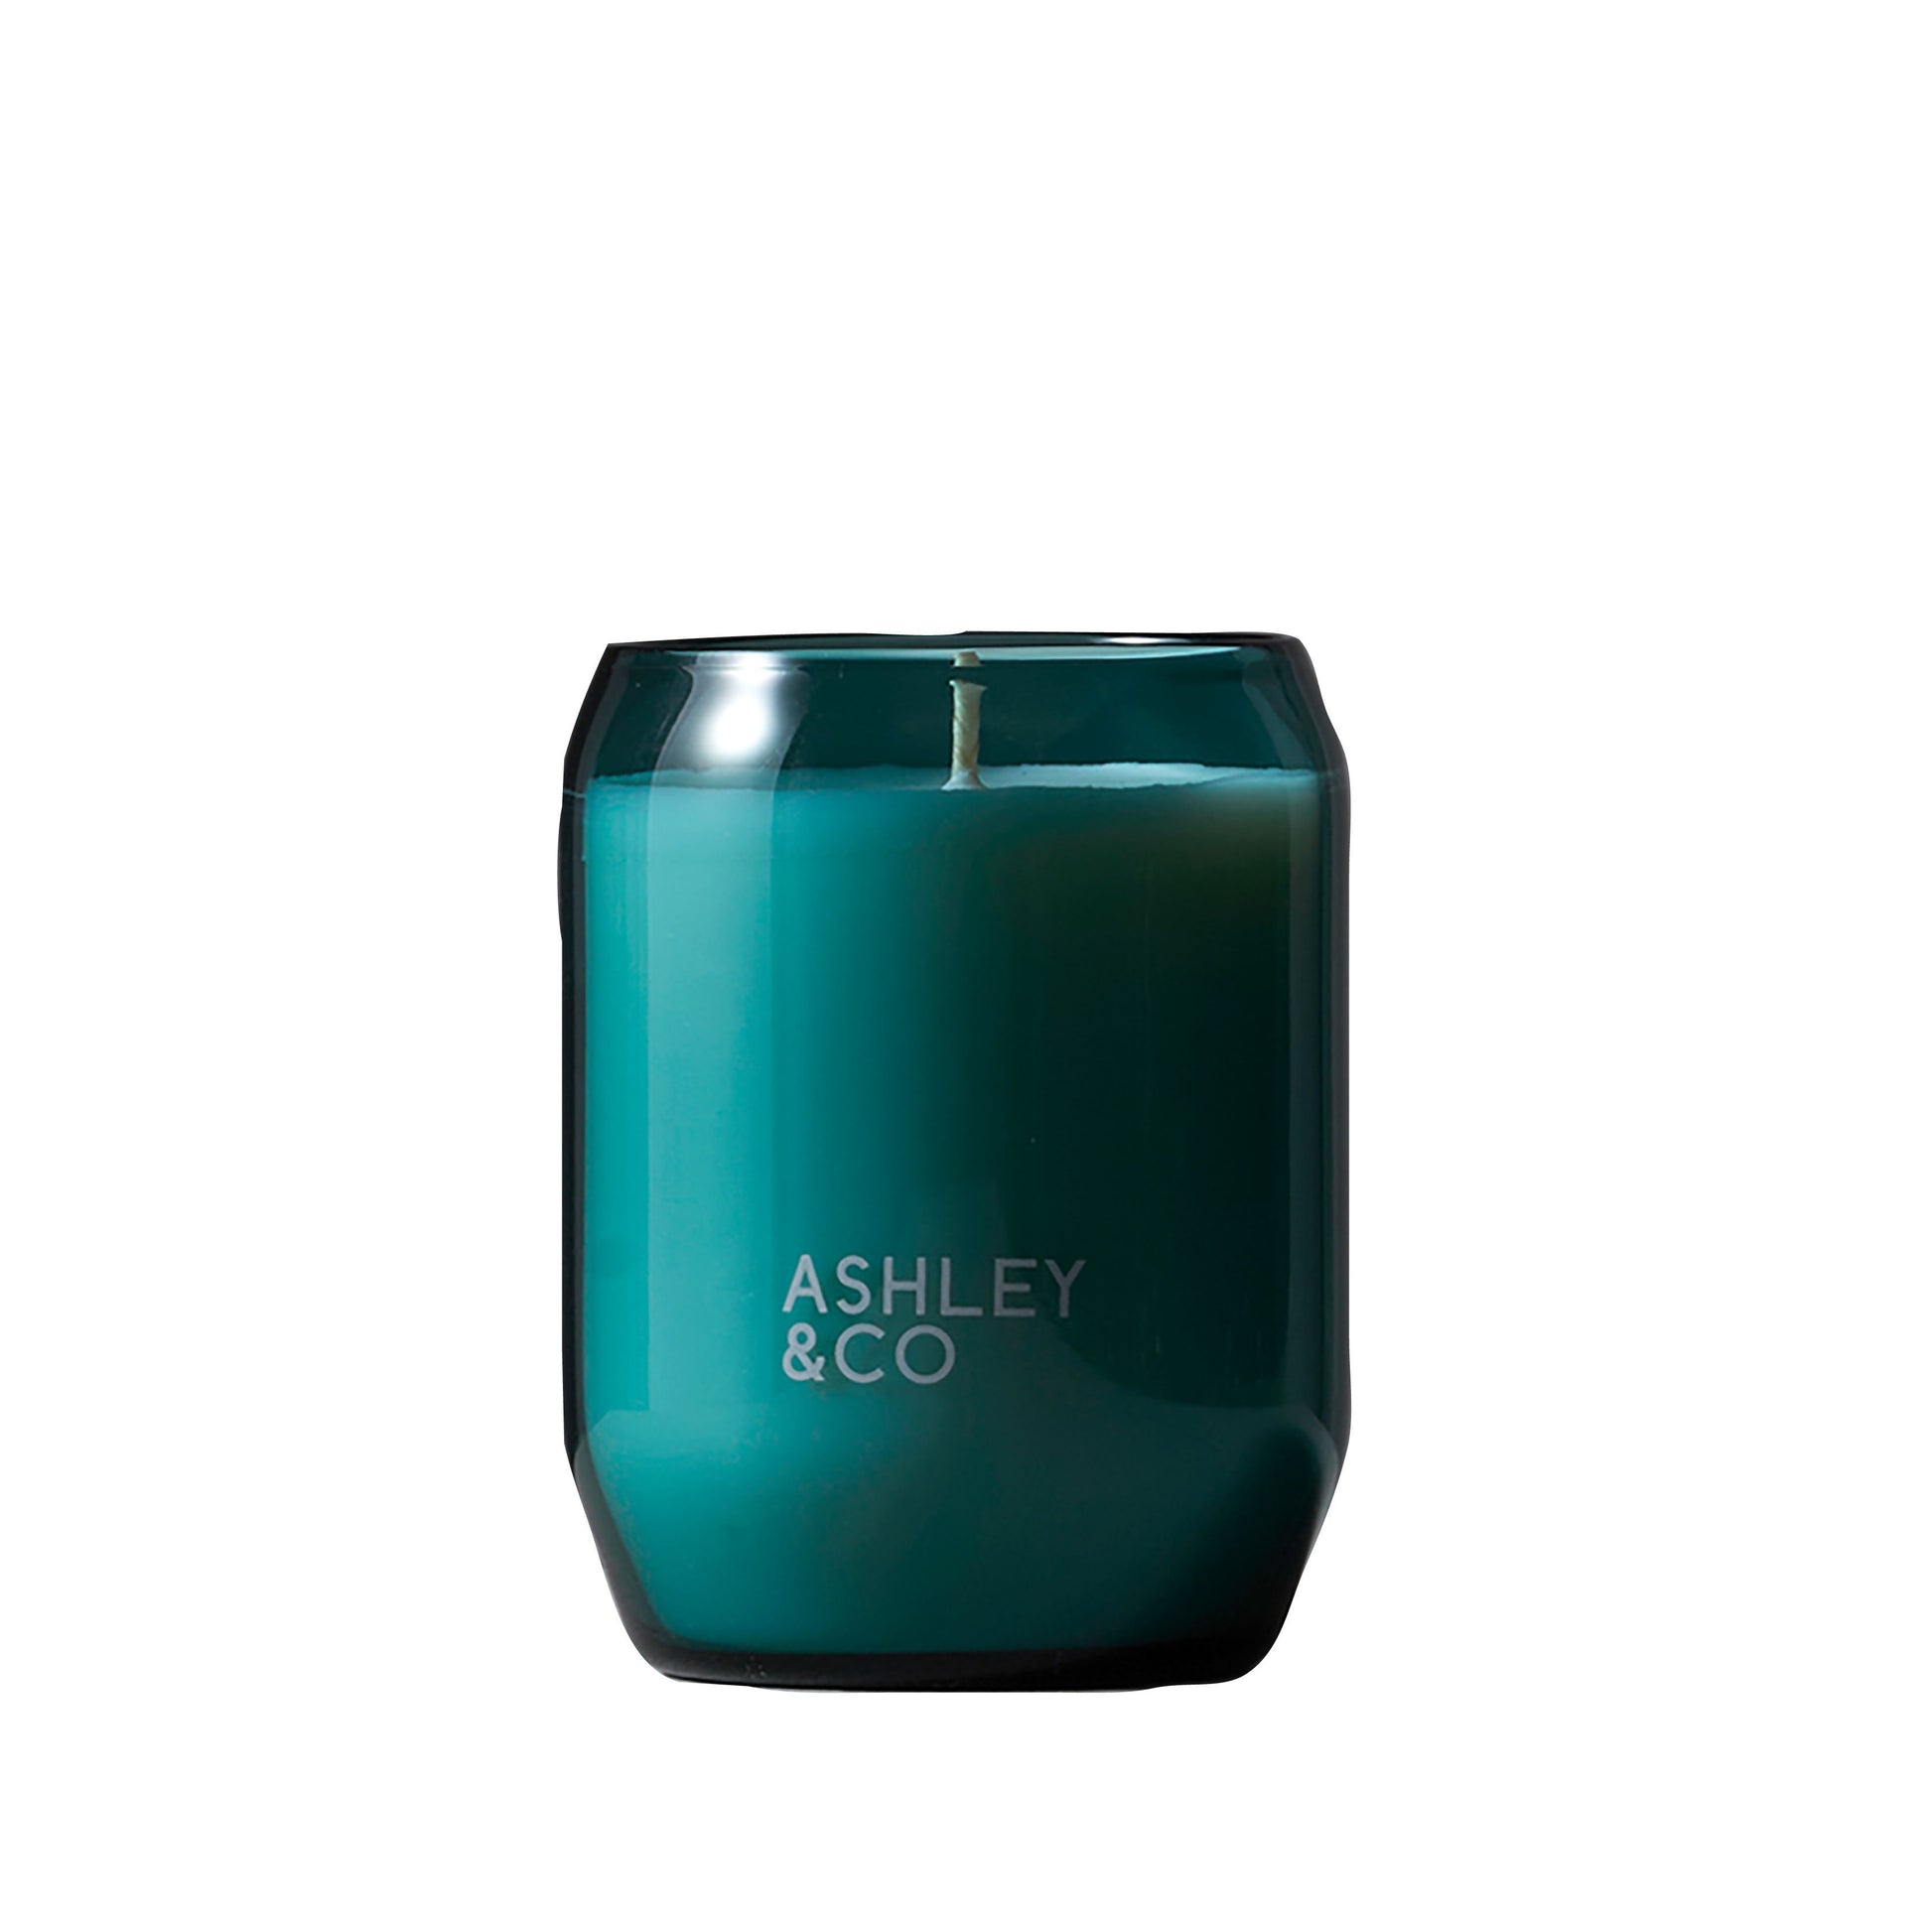 Ashley & Co's waxed perfume outdoor candle features their 100% natural wax combined with the much-loved scent of Tui & Kahili, supported by the citrussy, insect repelling properties of citronella oil.   This perfumed candle is crafted and poured by hand locally, here in New Zealand. ​​​​​​​ Like sweet nectar enticing the Tui, notes of wild spreading ginger and delicate lily, will have you scouring the native flora for this alluring scent.   Scent:  Tui & Kahili   Size:  207g